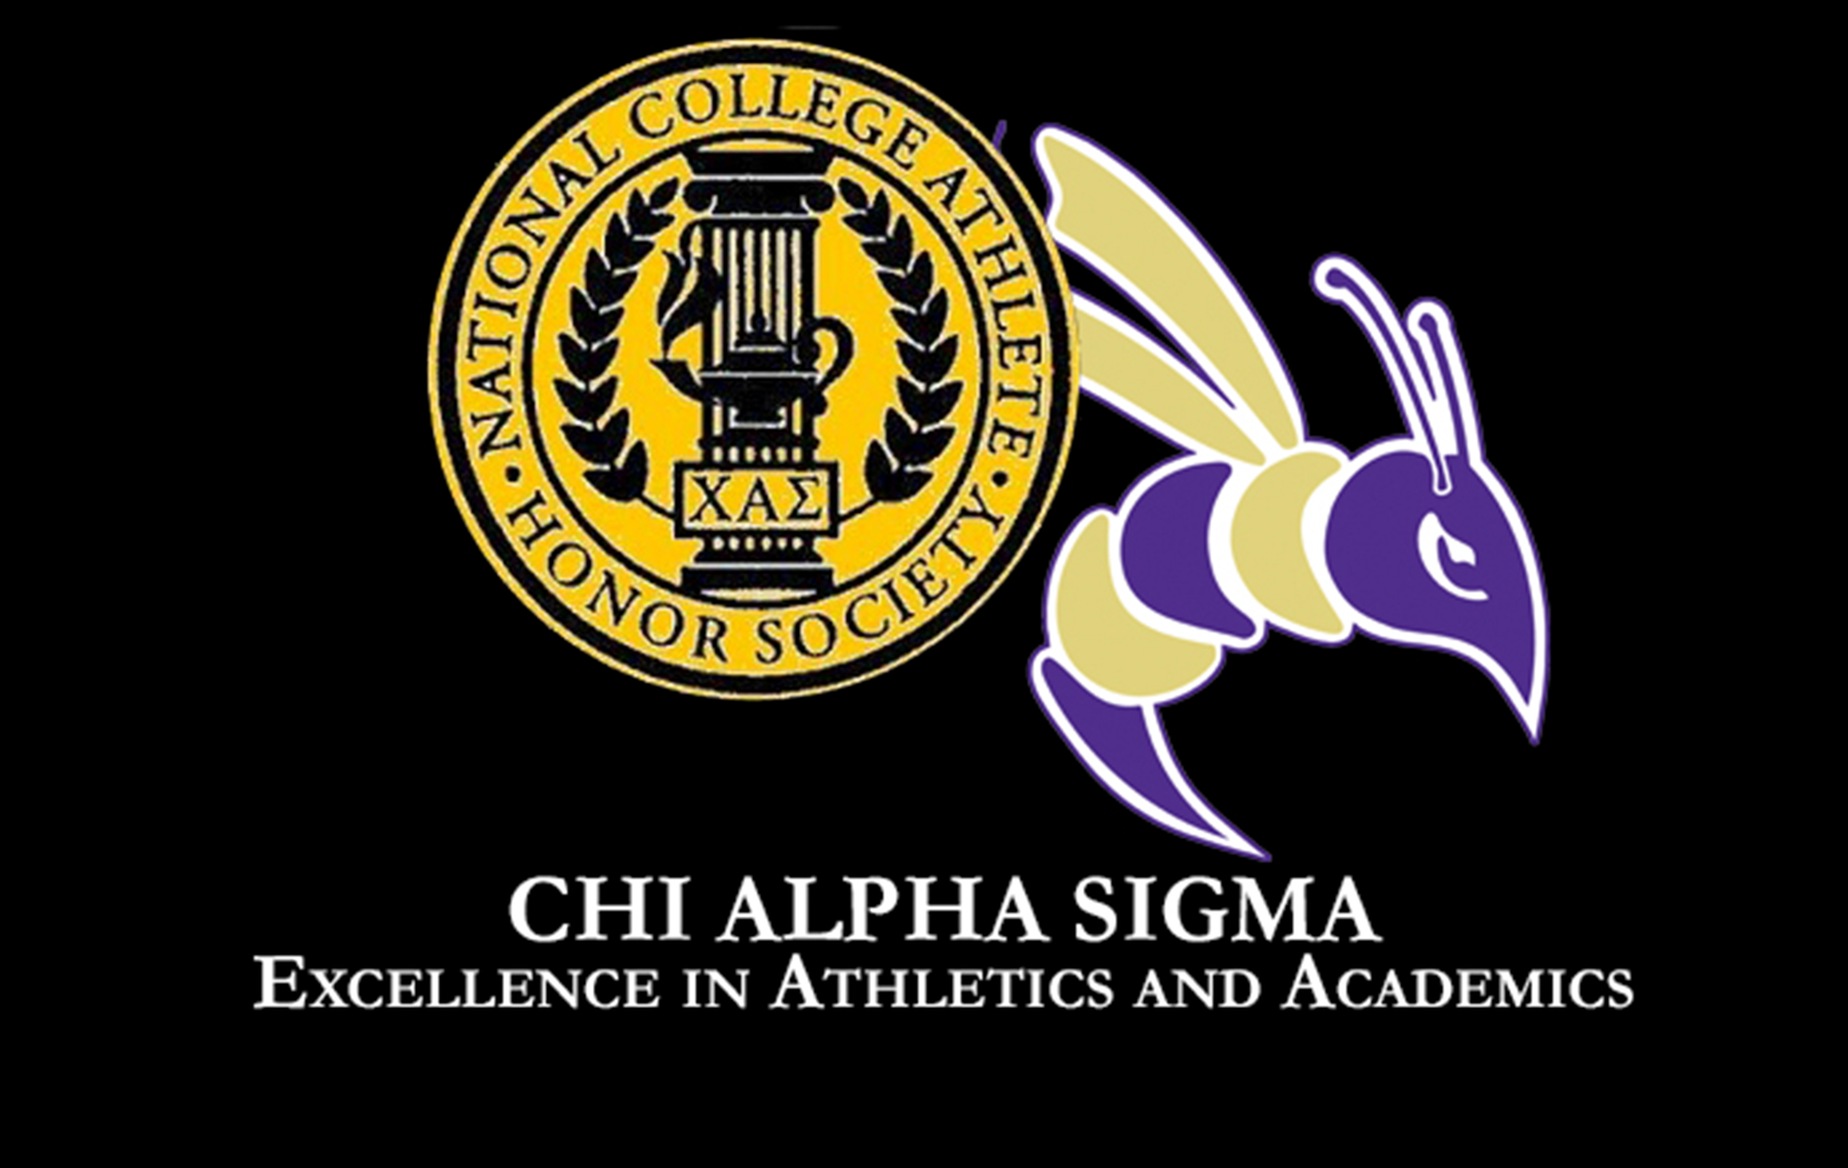 Defiance Has 61 Student-Athletes Selected Chi Alpha Sigma